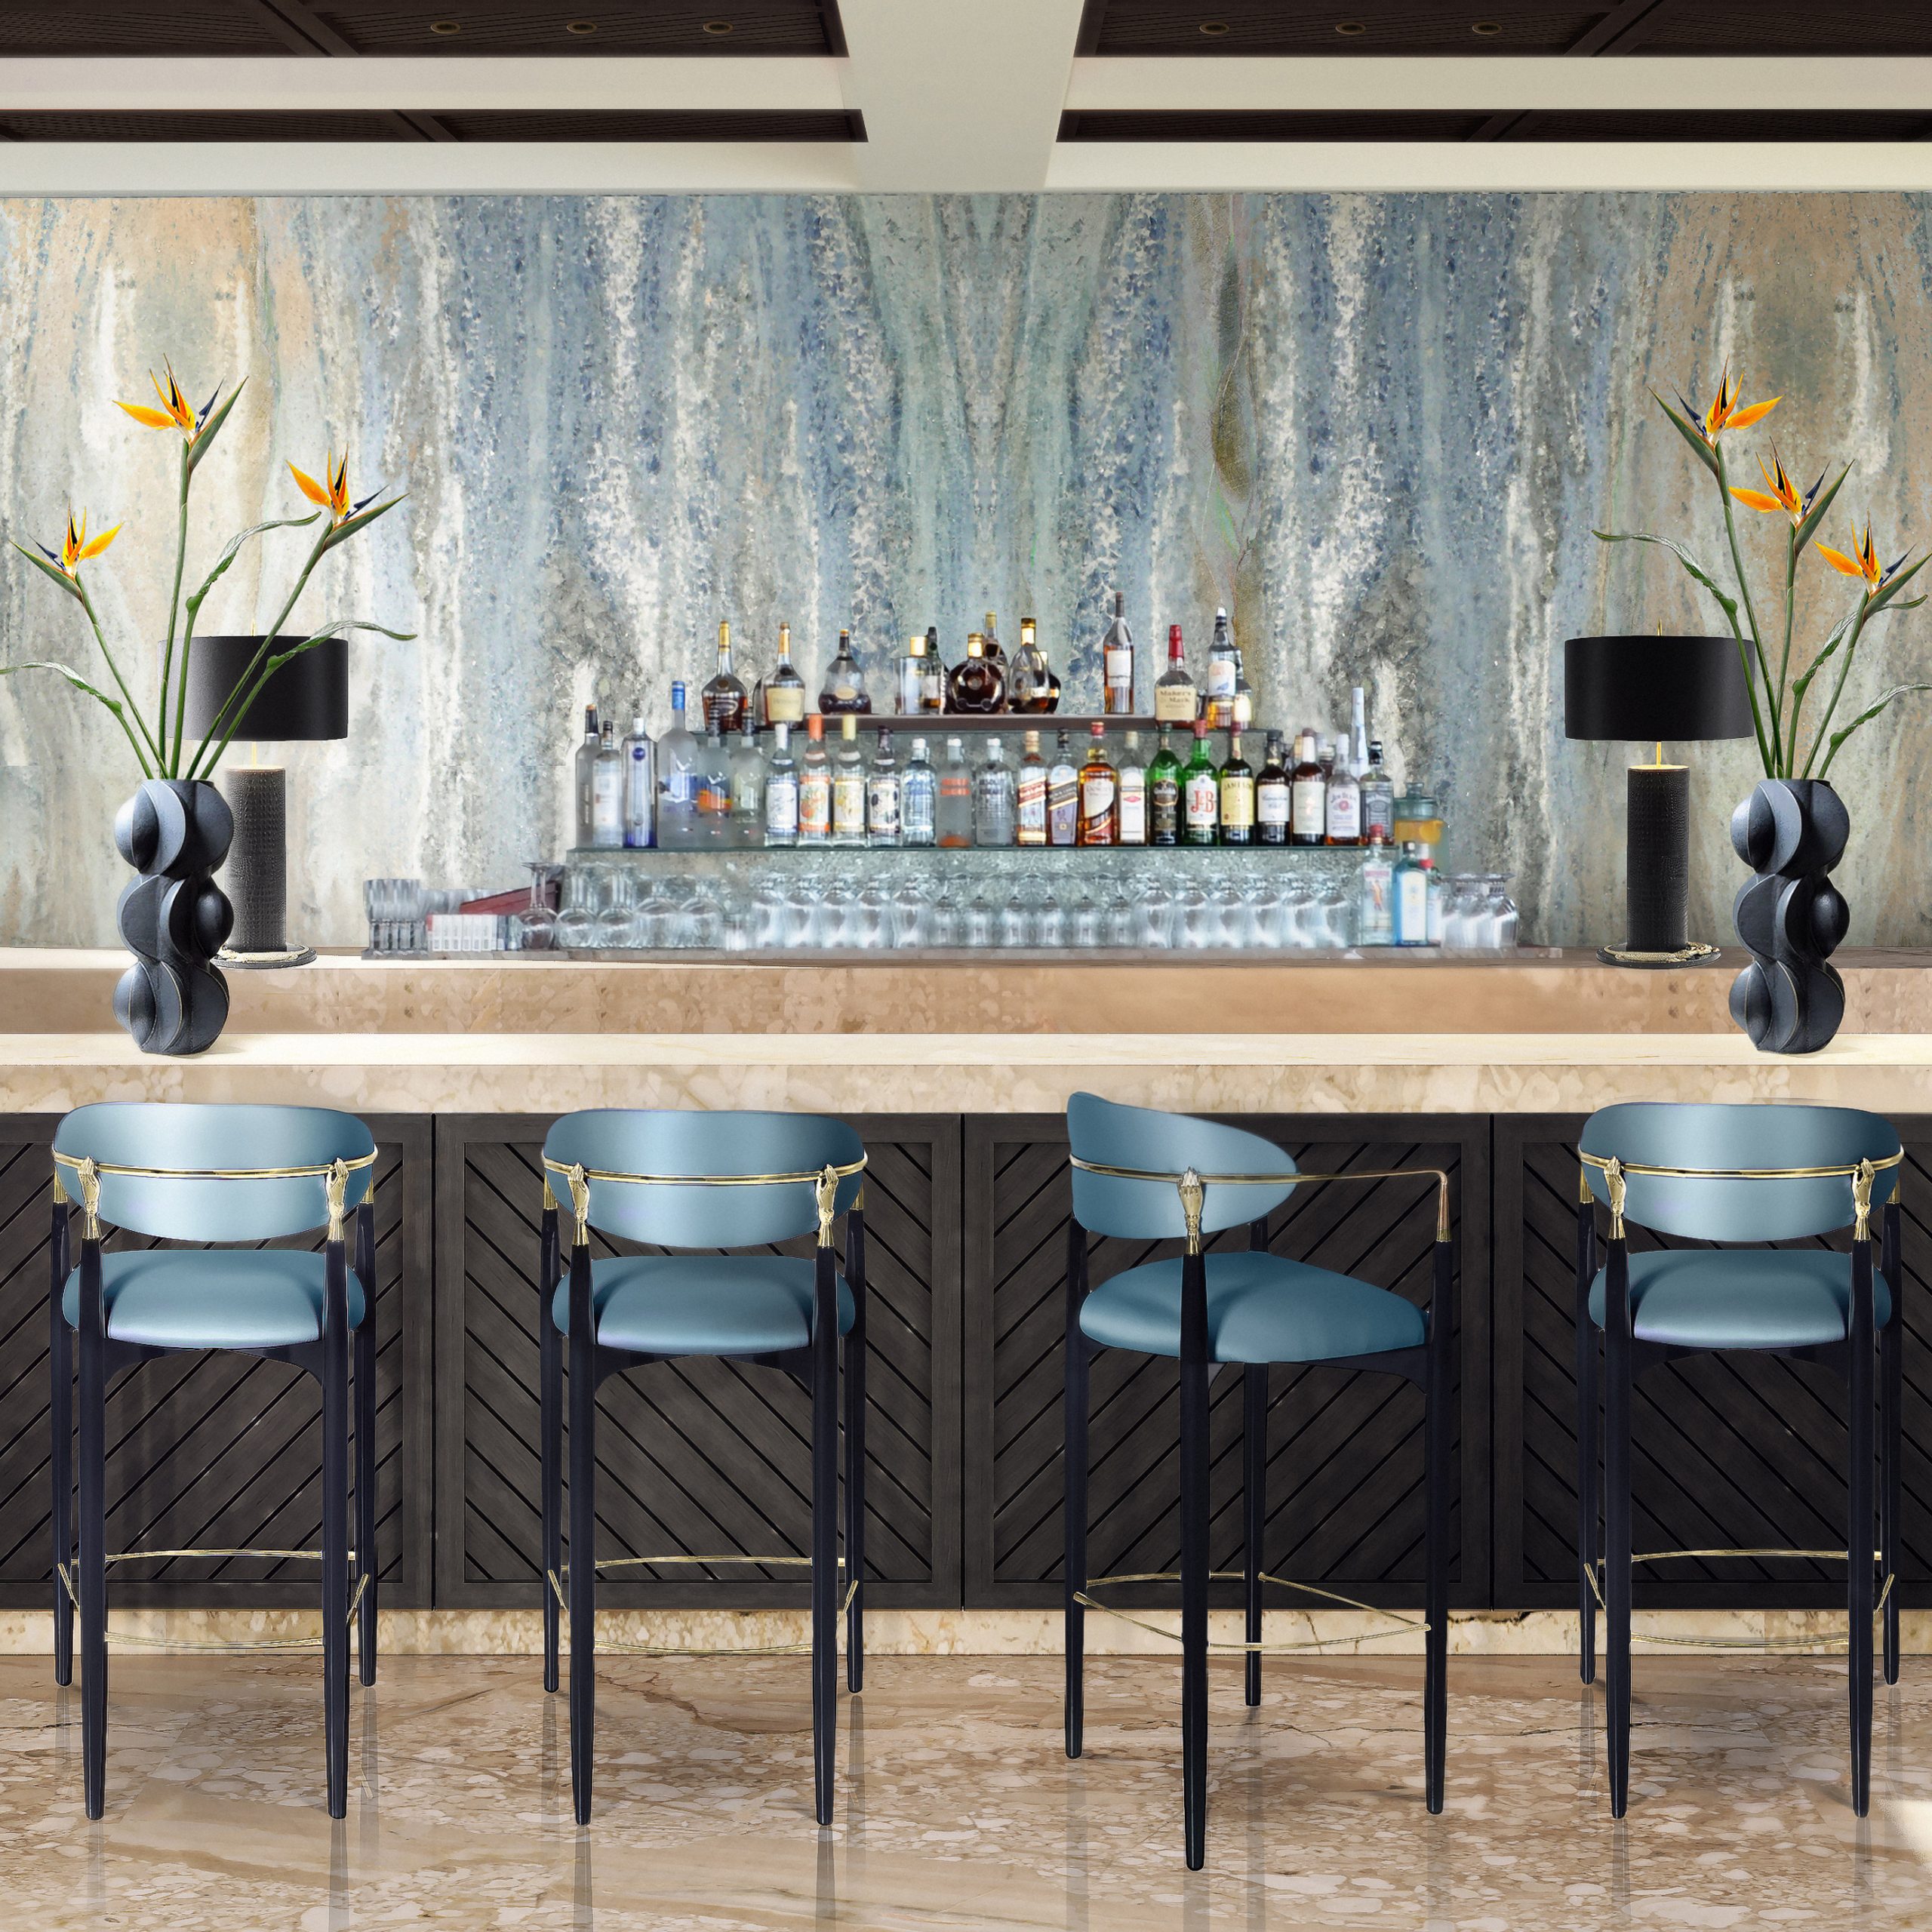 Top 5 Best Mid-Century Bar Stools for Small Spaces